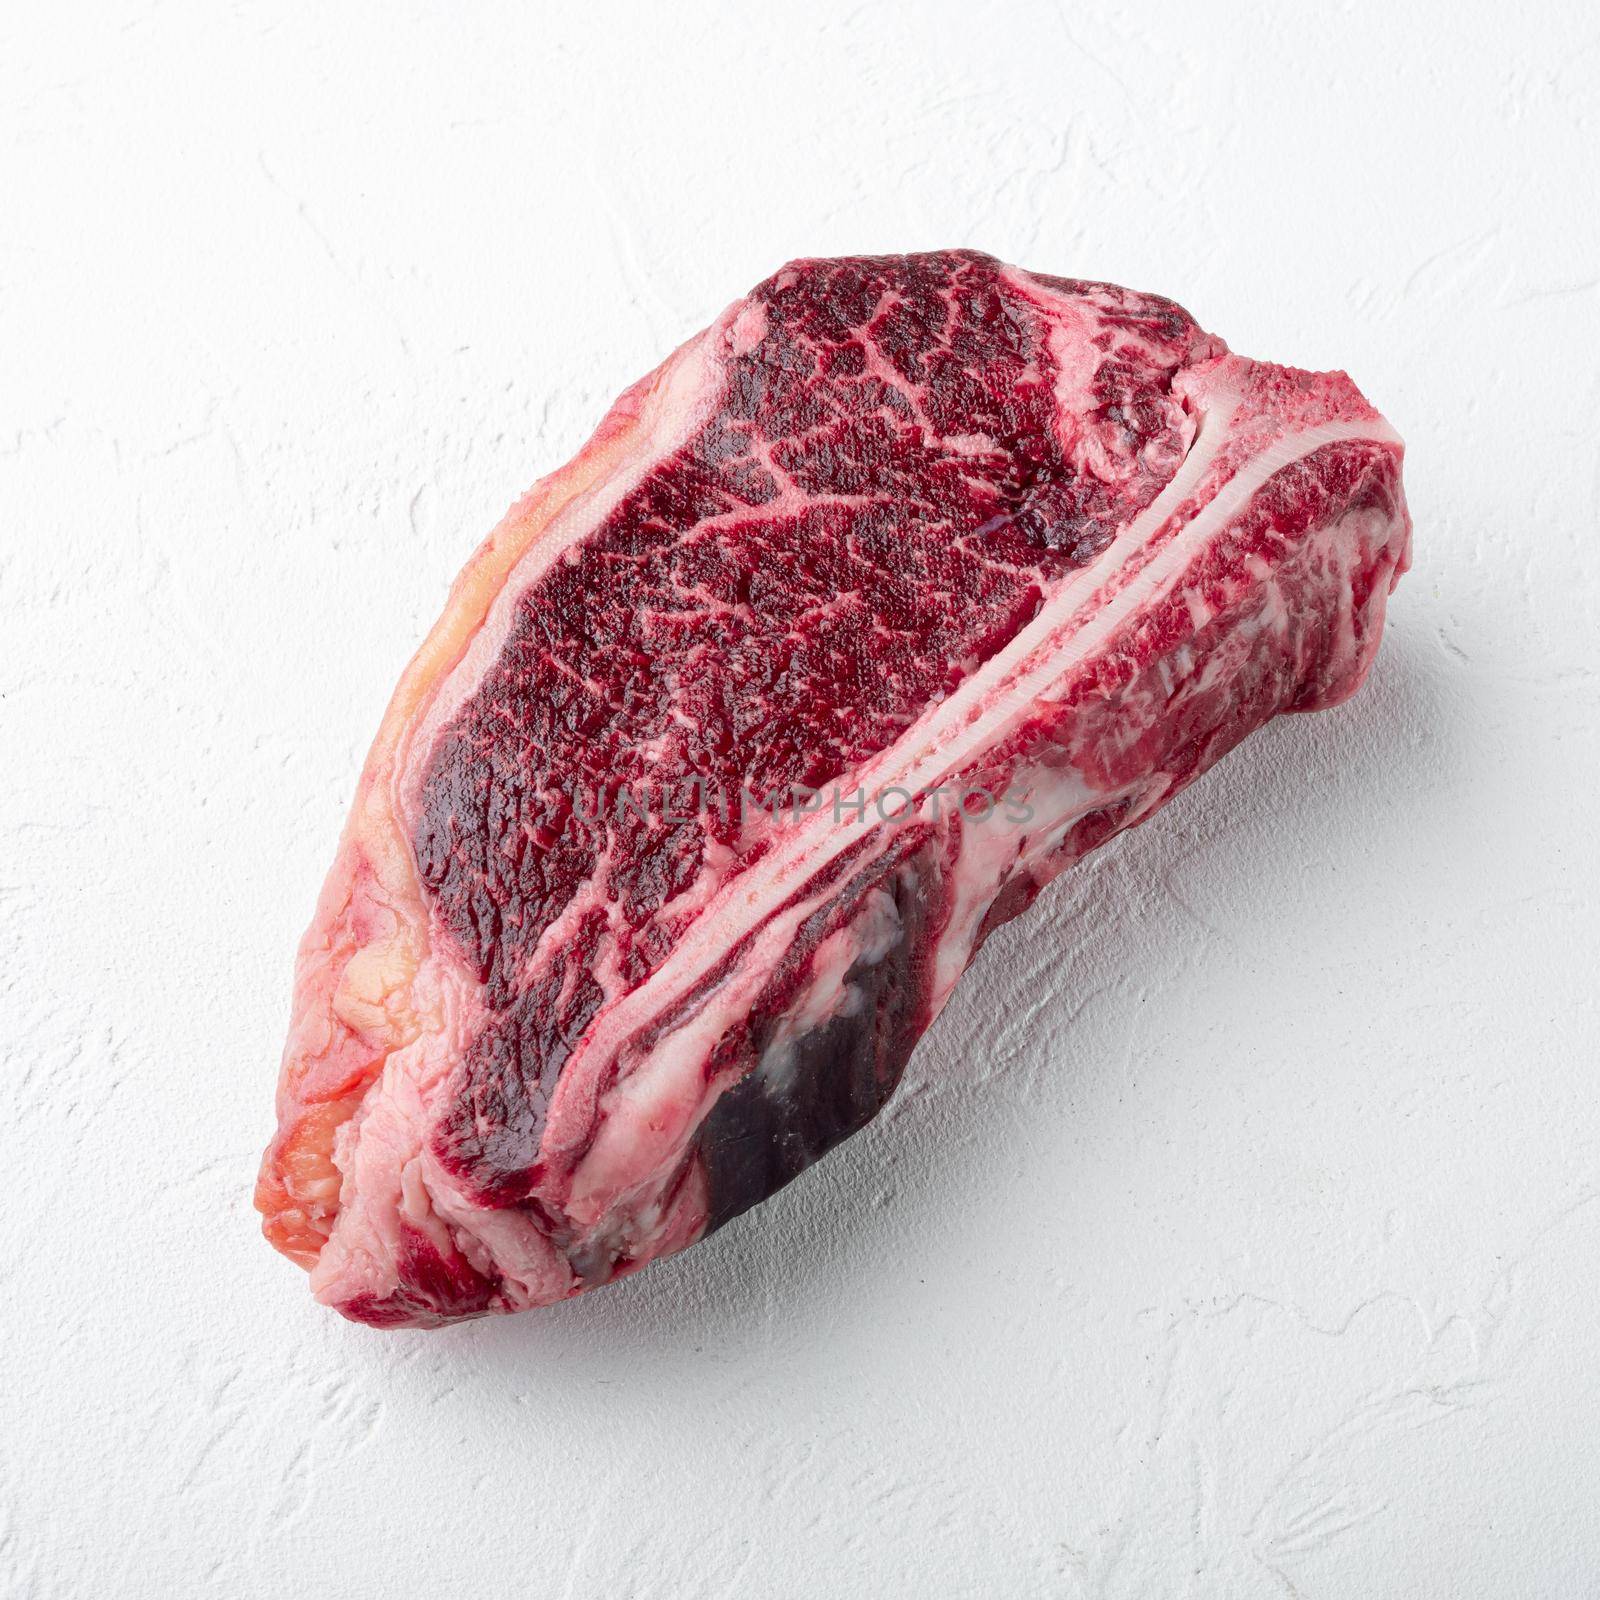 Dry aged club steak, square format, on white stone surface by Ilianesolenyi